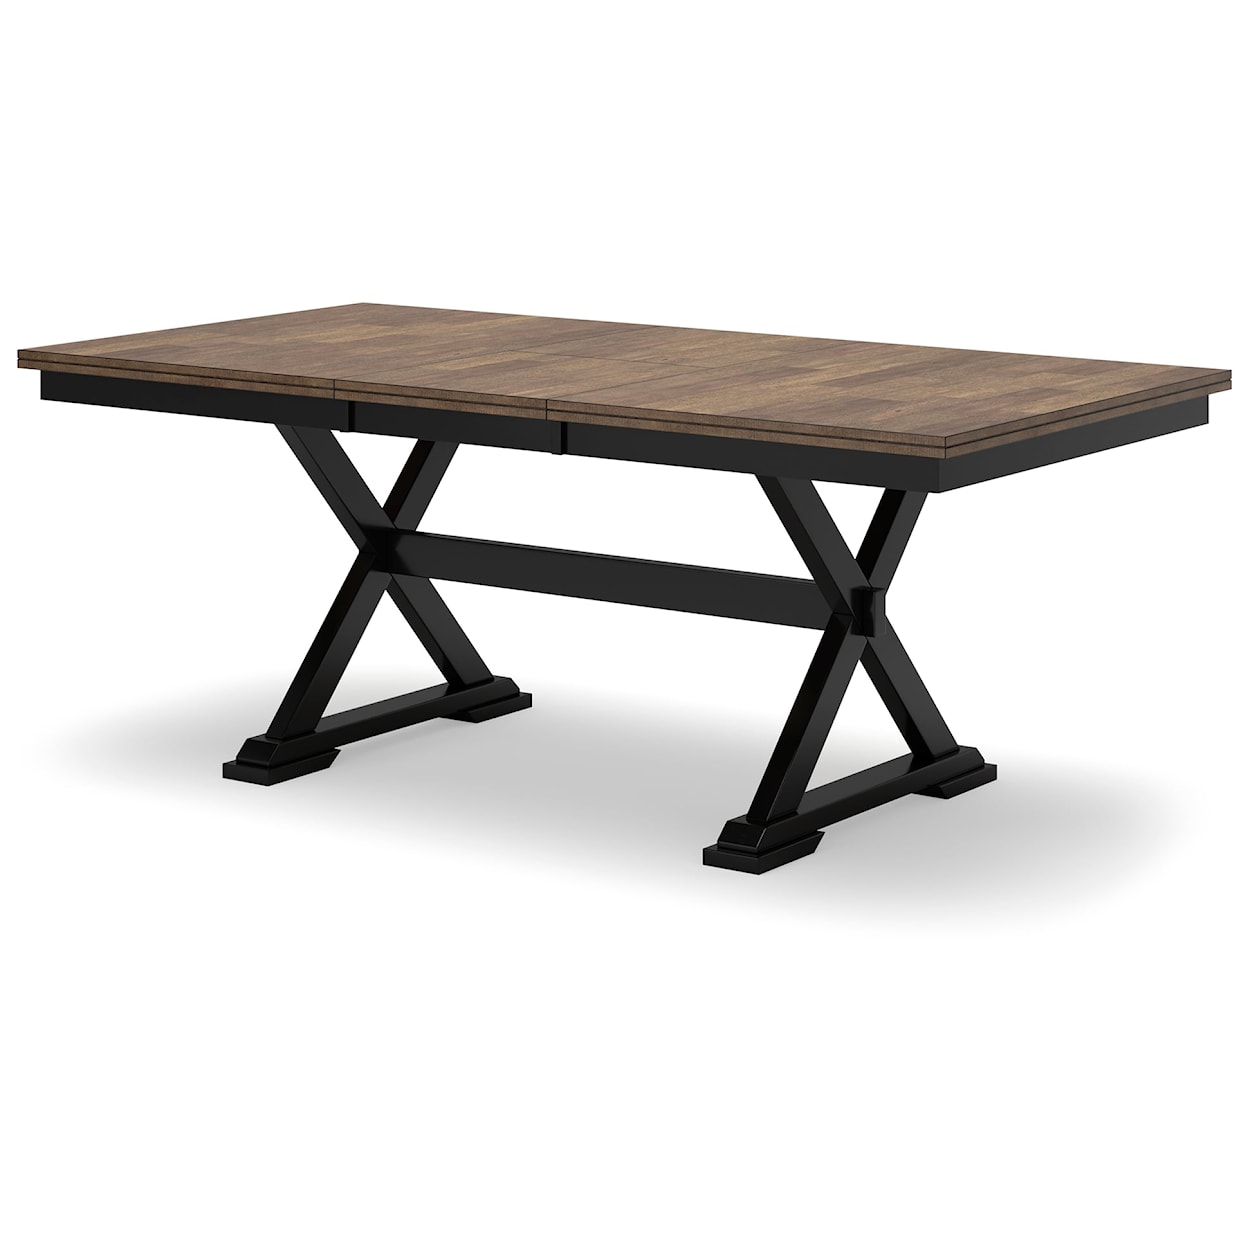 Benchcraft Wildenauer Rectangular Dining Room Extension Table